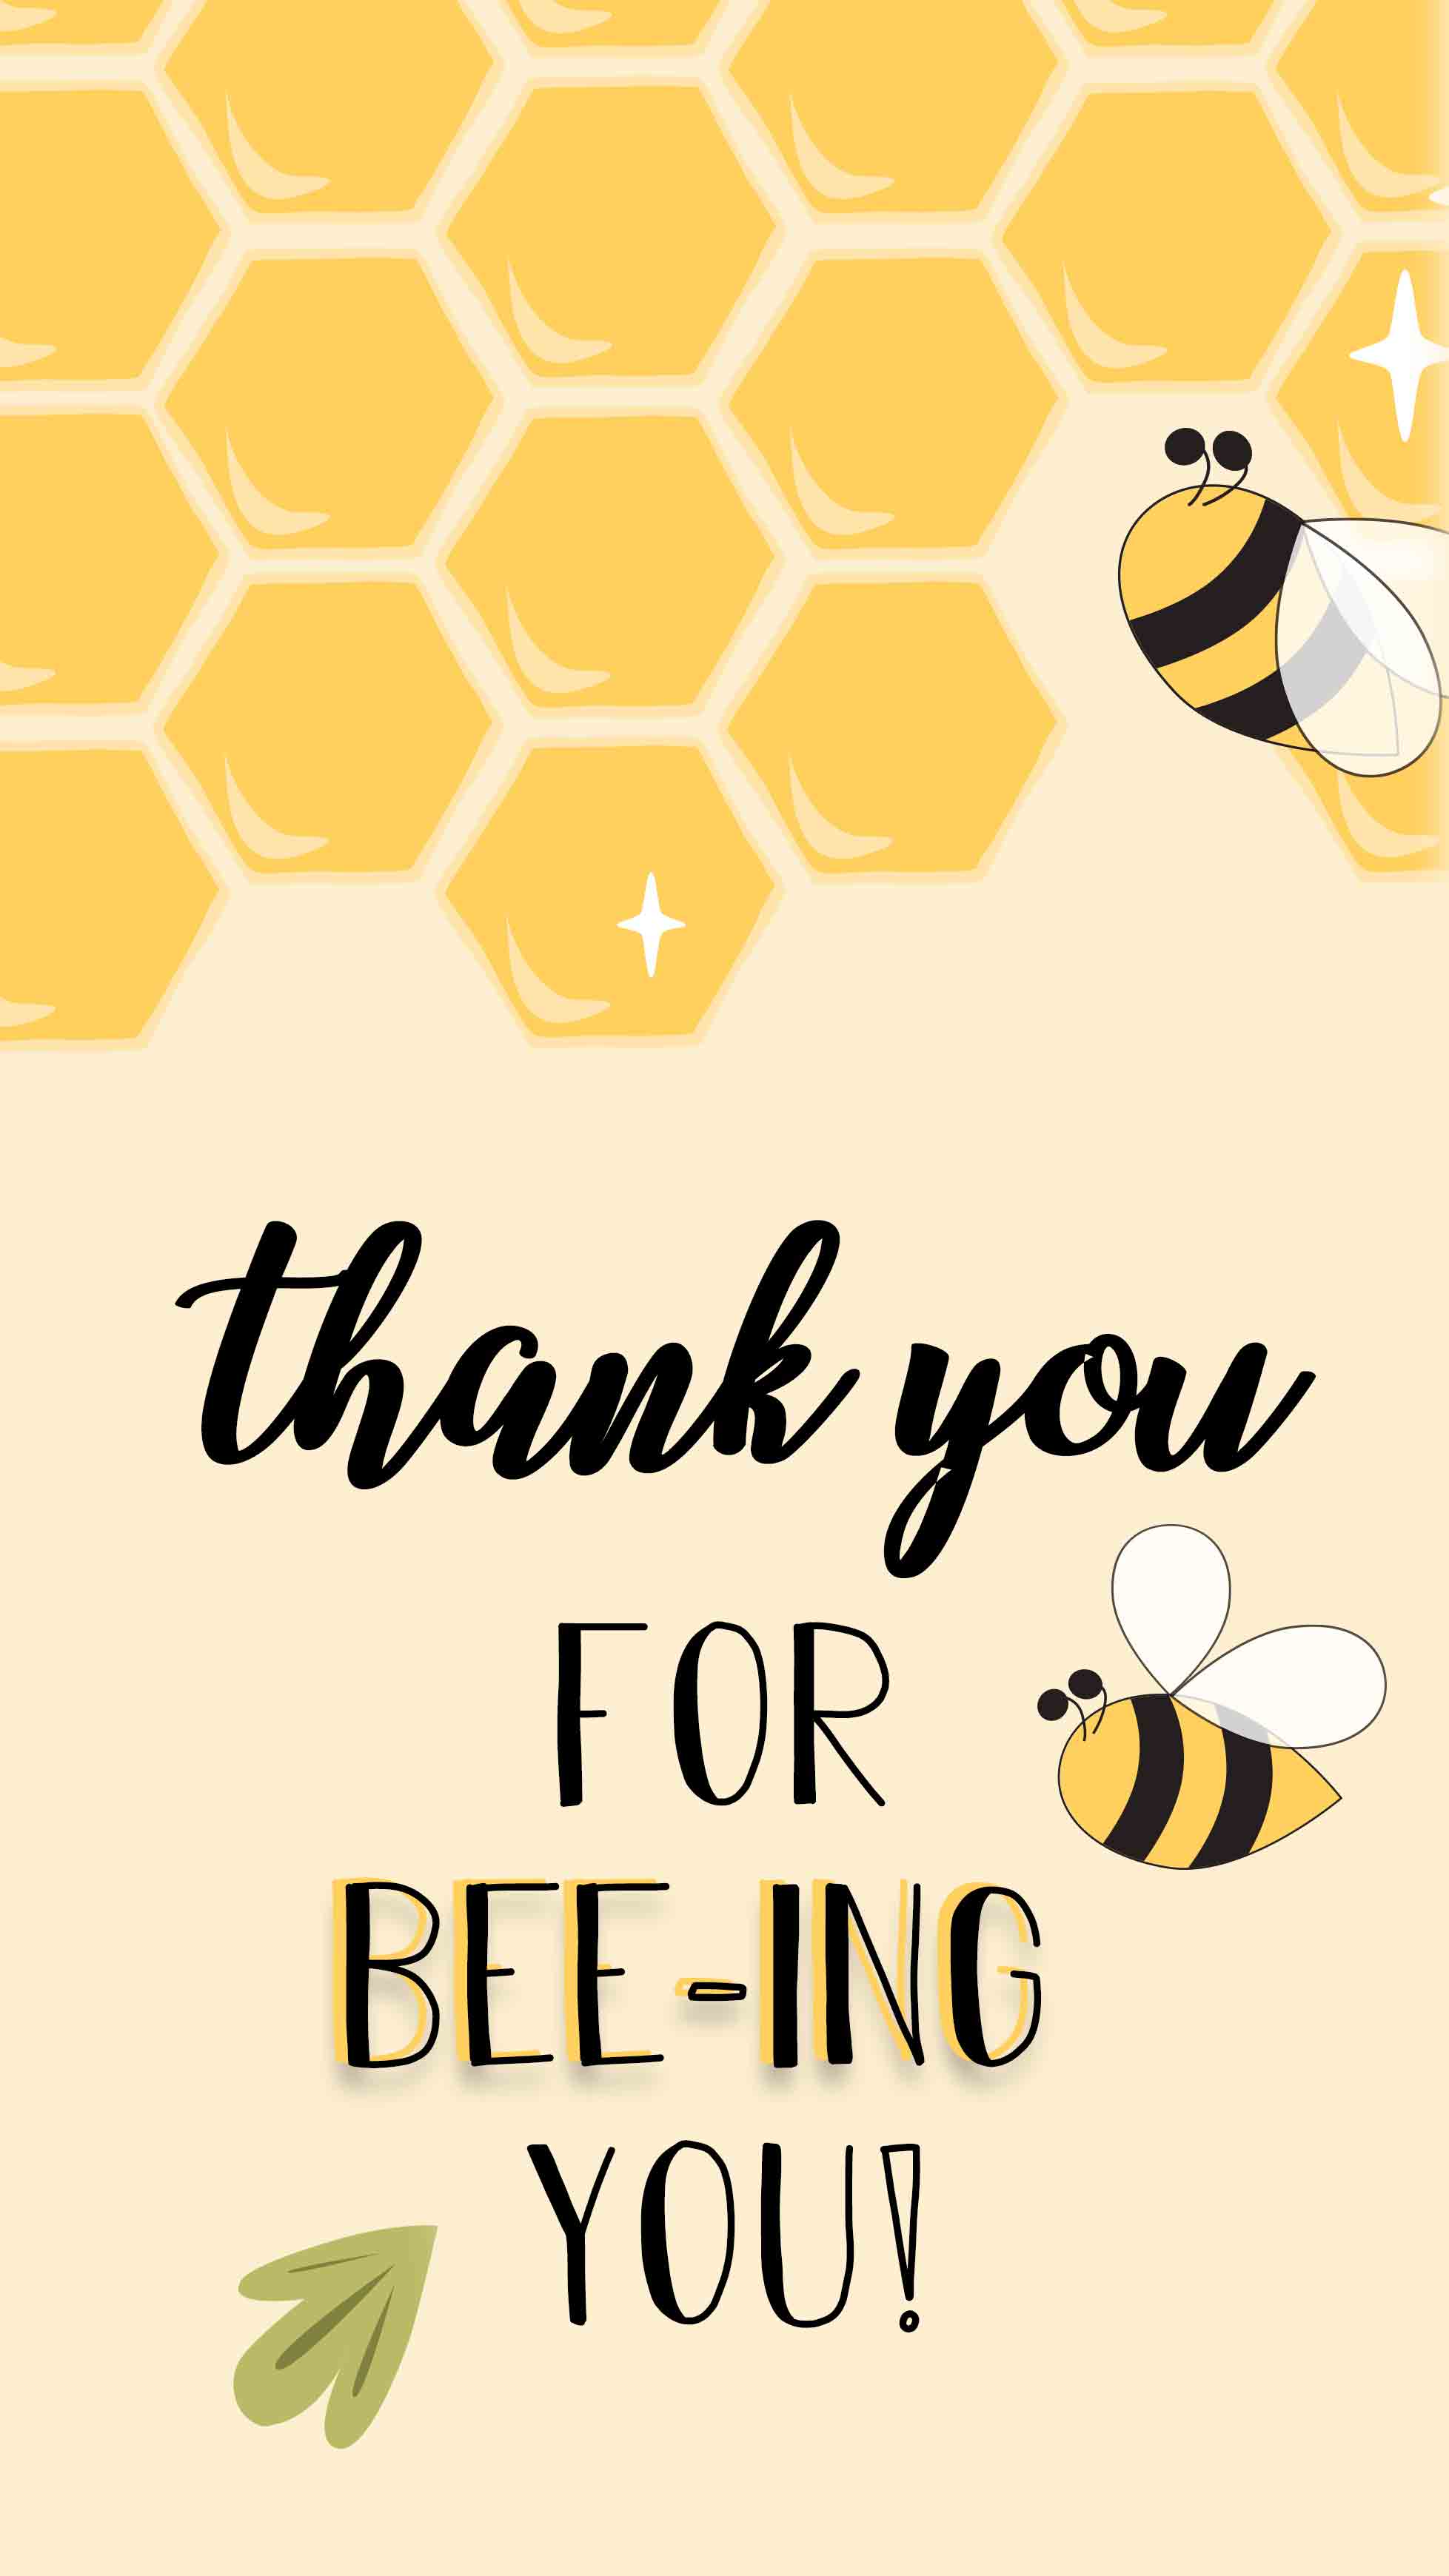 Beeing You